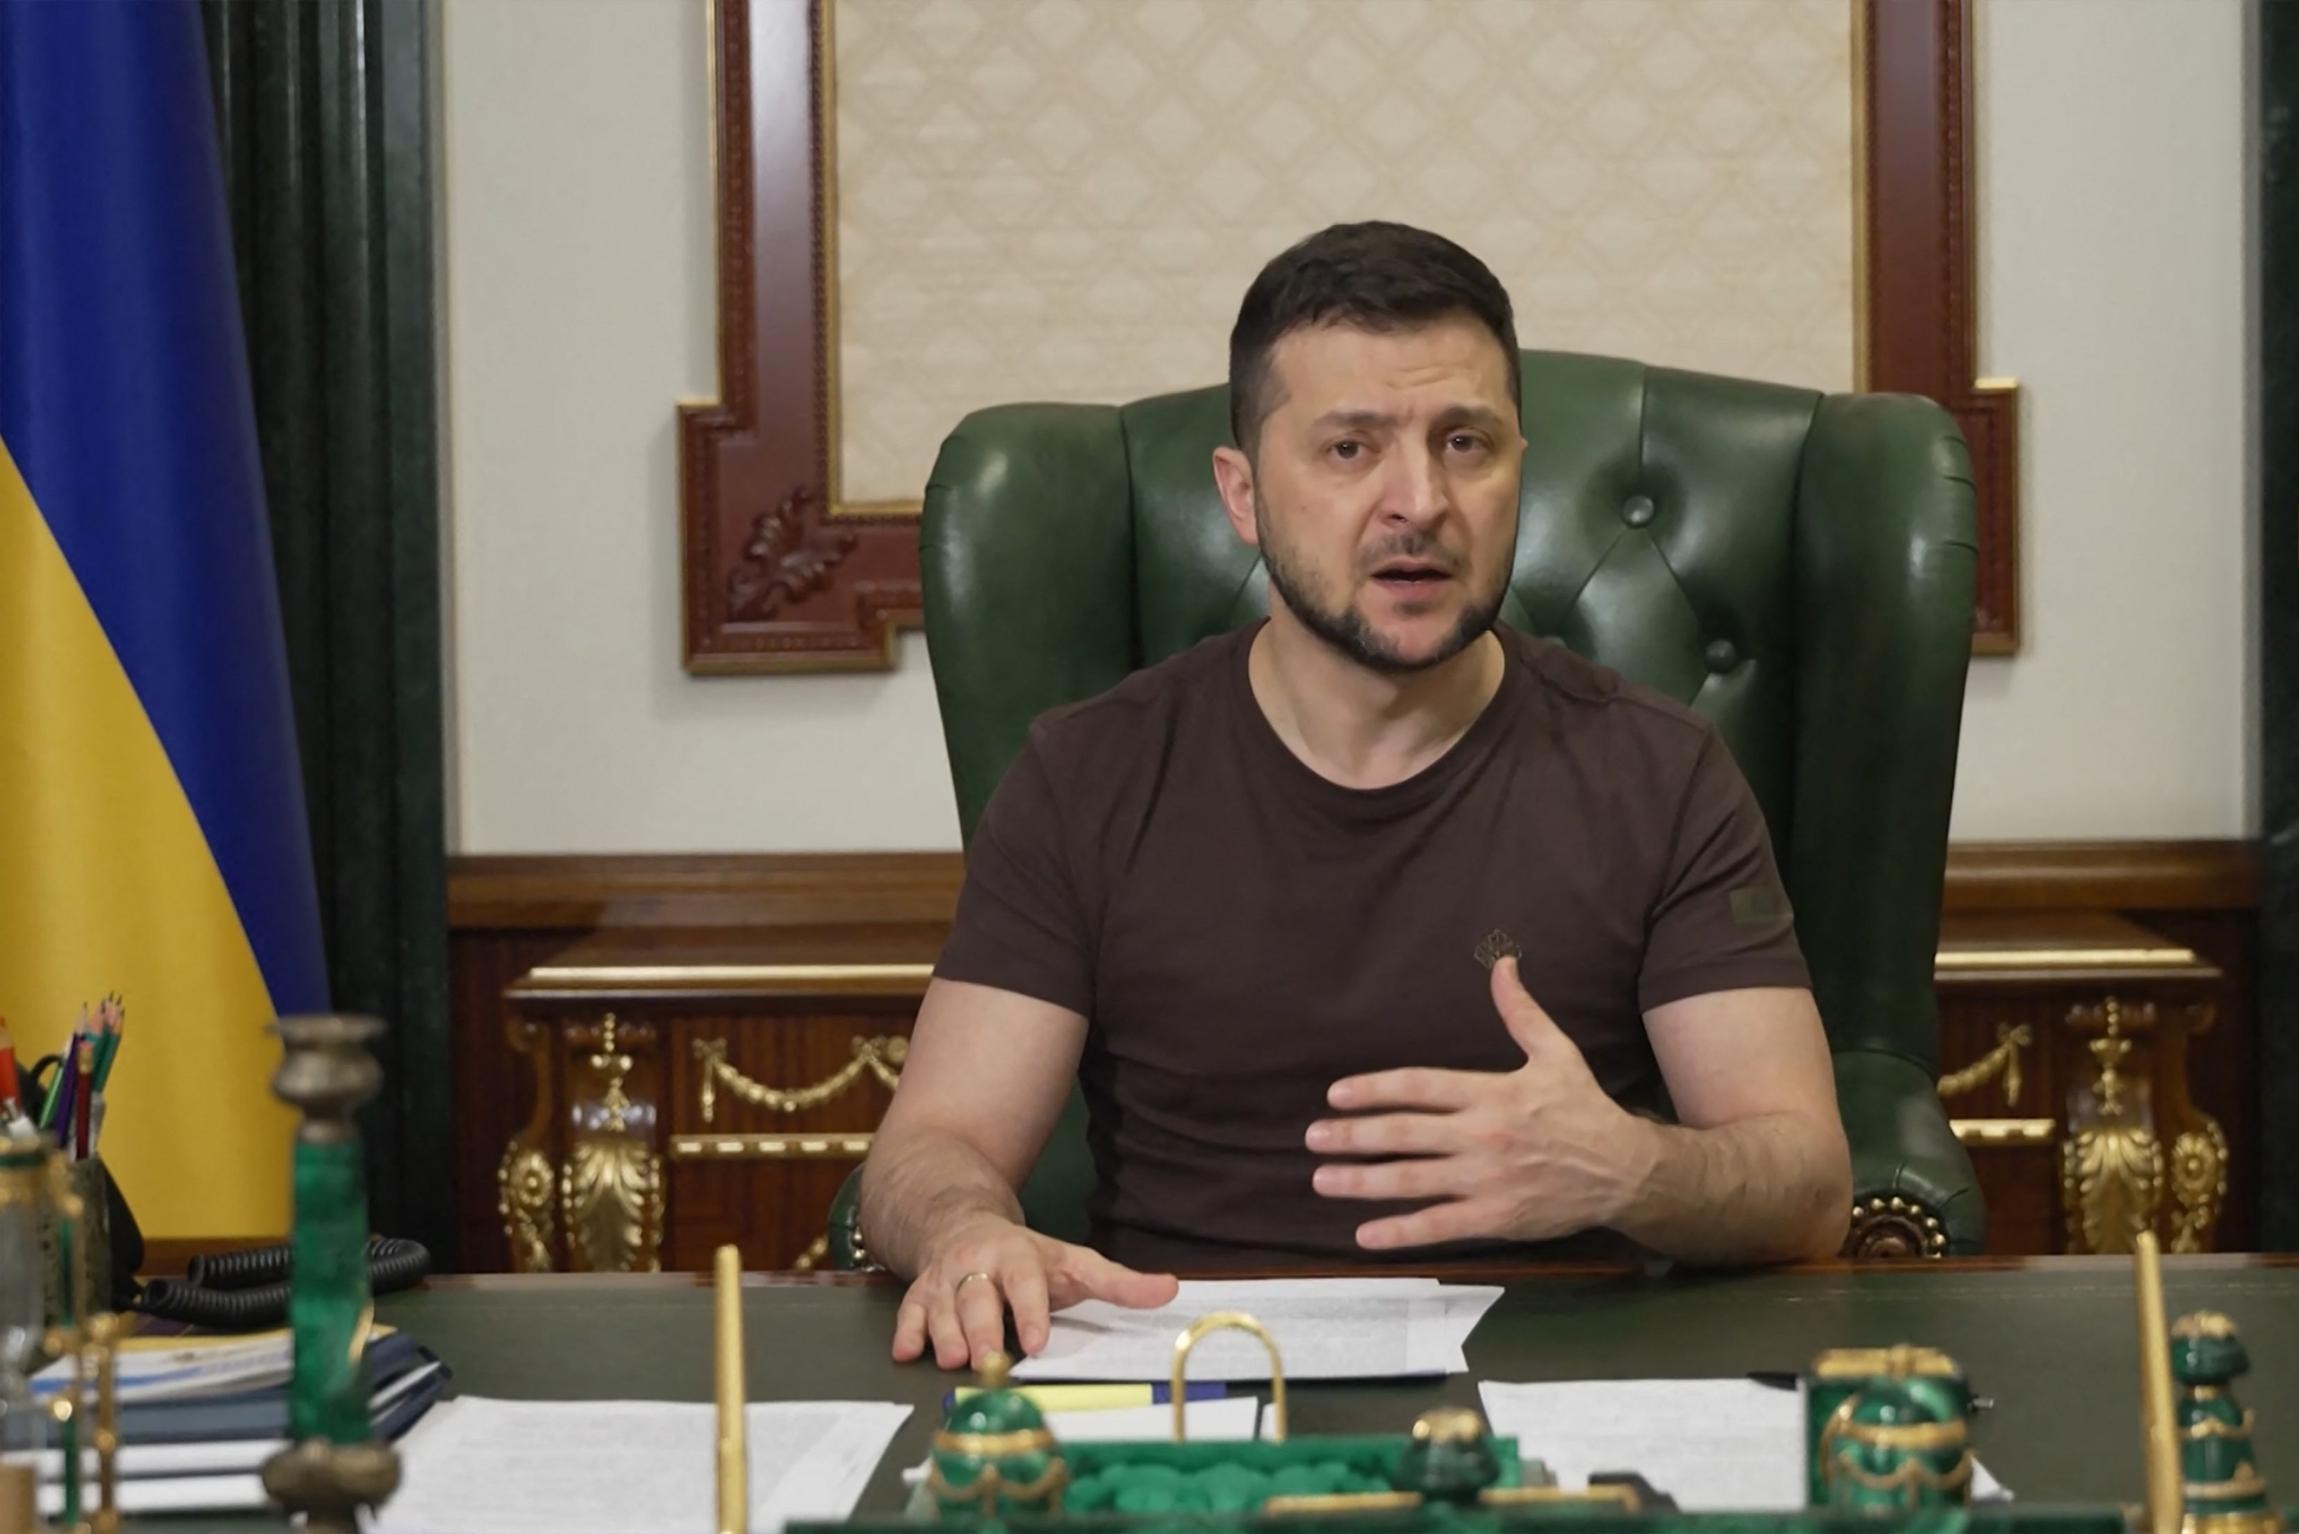 Zelensky compares Russia to Nazi Germany: “Moscow is now talking about a ‘final solution’, but this time it’s about the Ukrainian issue”